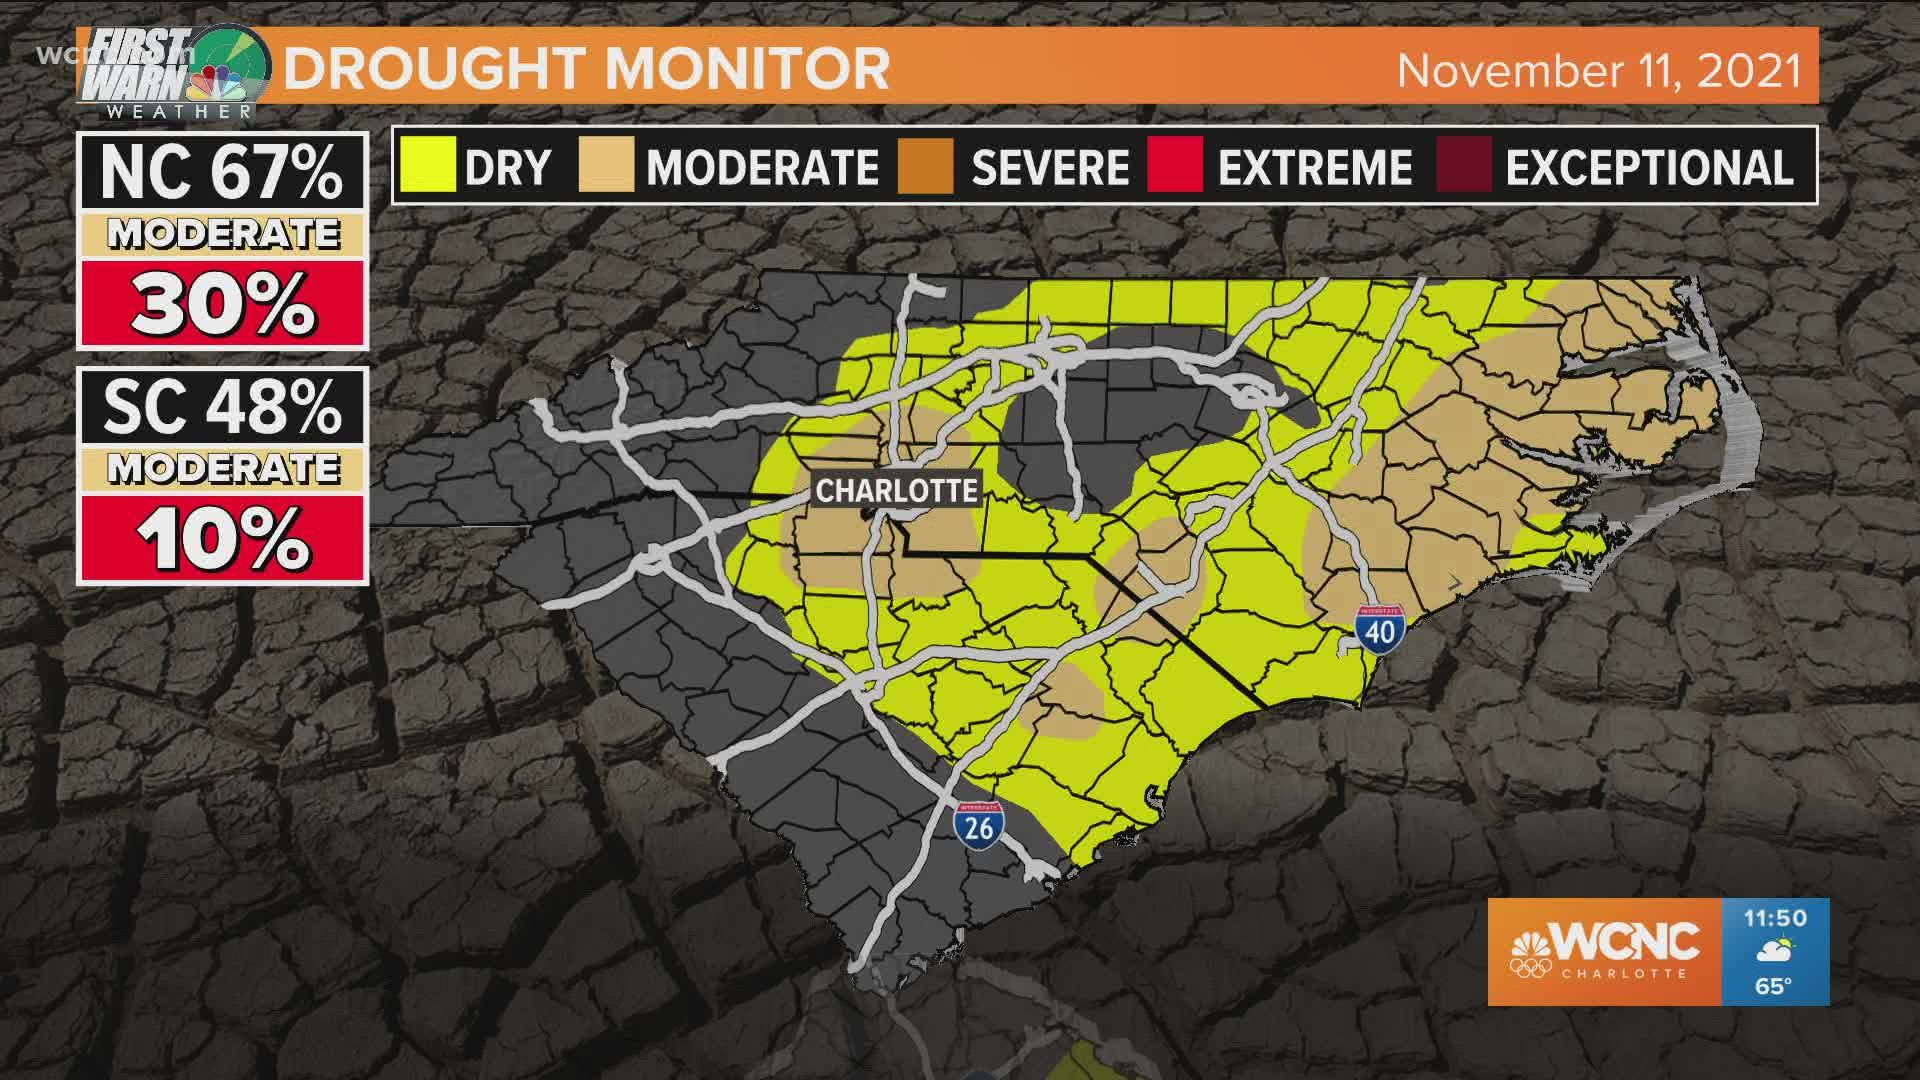 Thursday update to the drought monitor across the area. Currently trending in the wrong direction